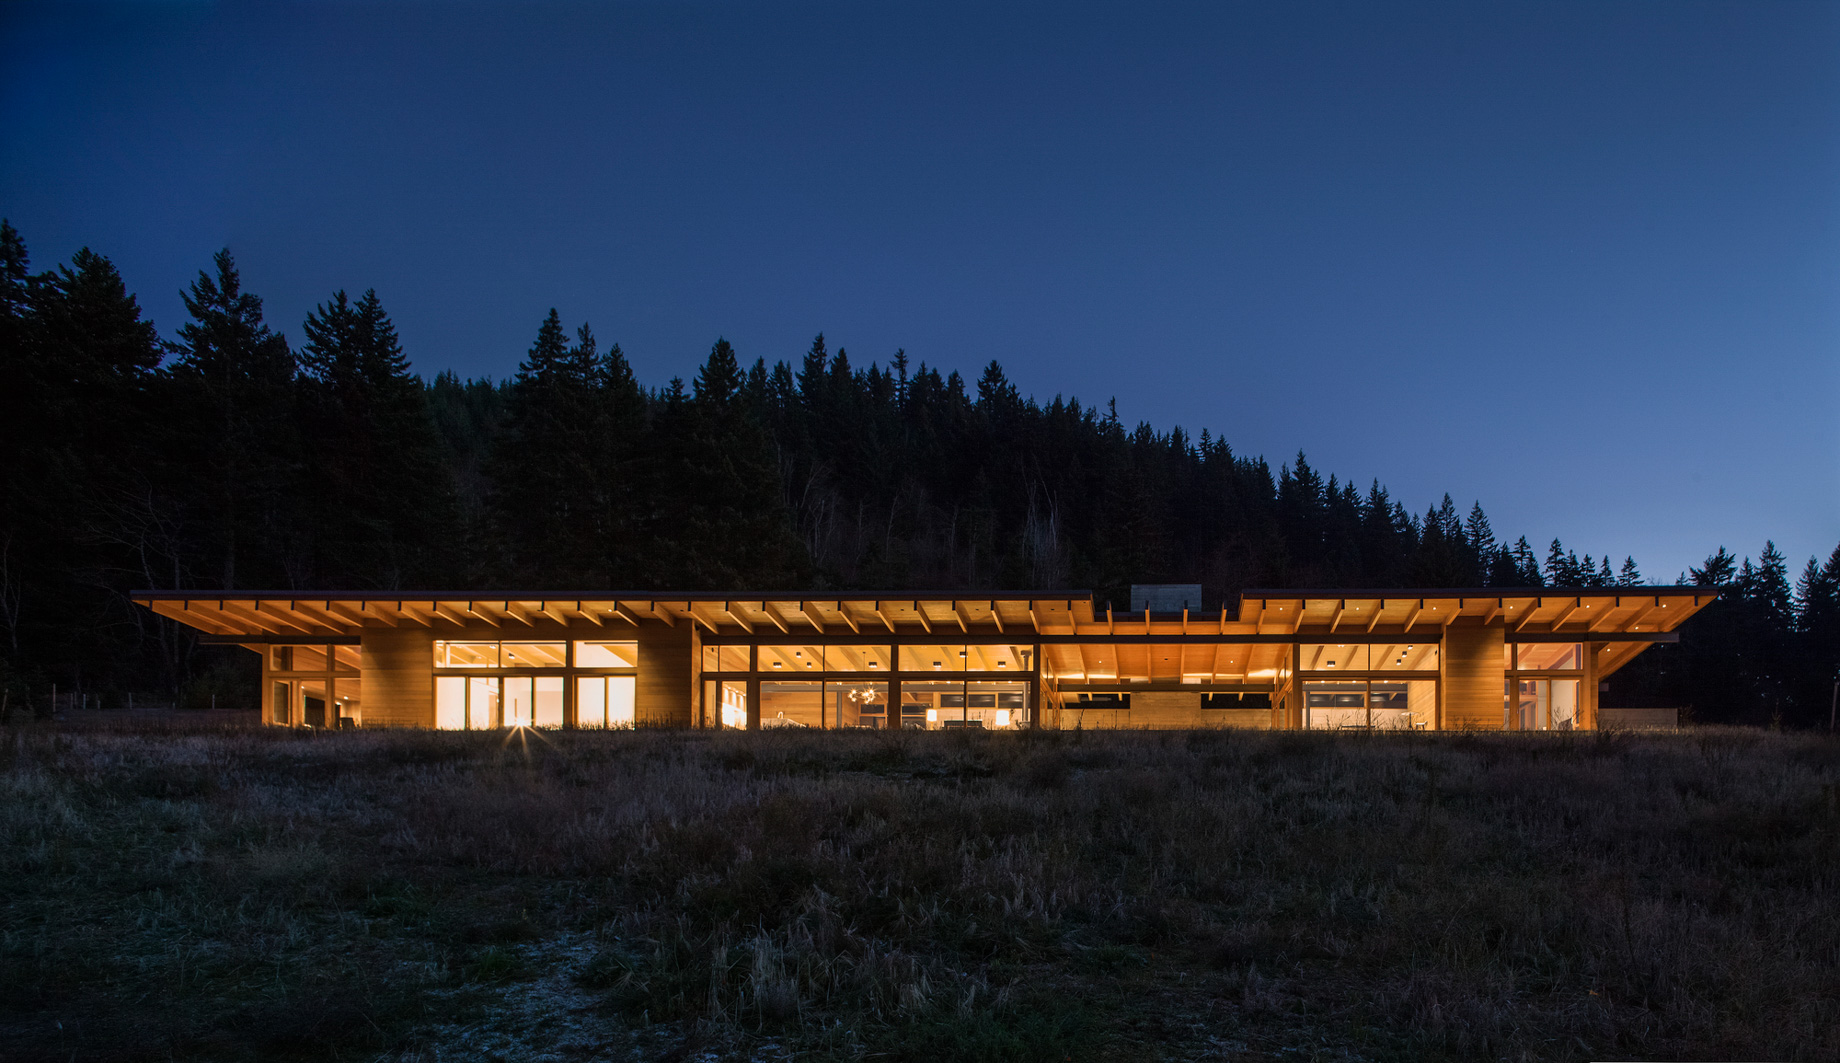 Hood River Residence – Booth Hill Rd, Hood River, OR, USA